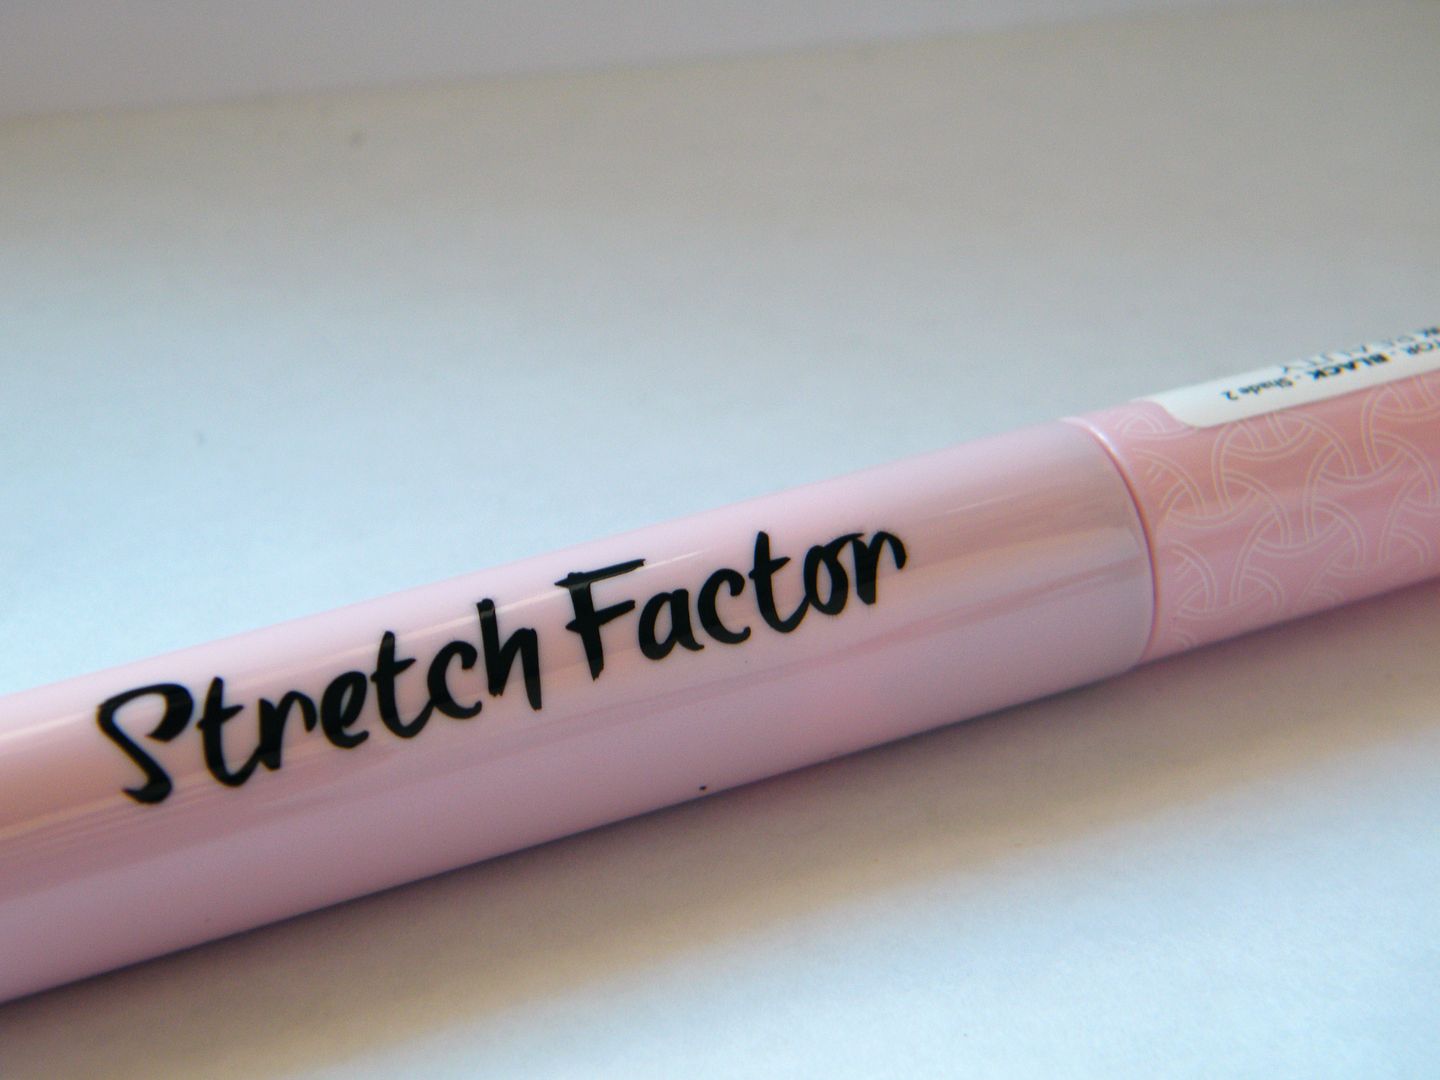 Look Beauty Stretch Factor